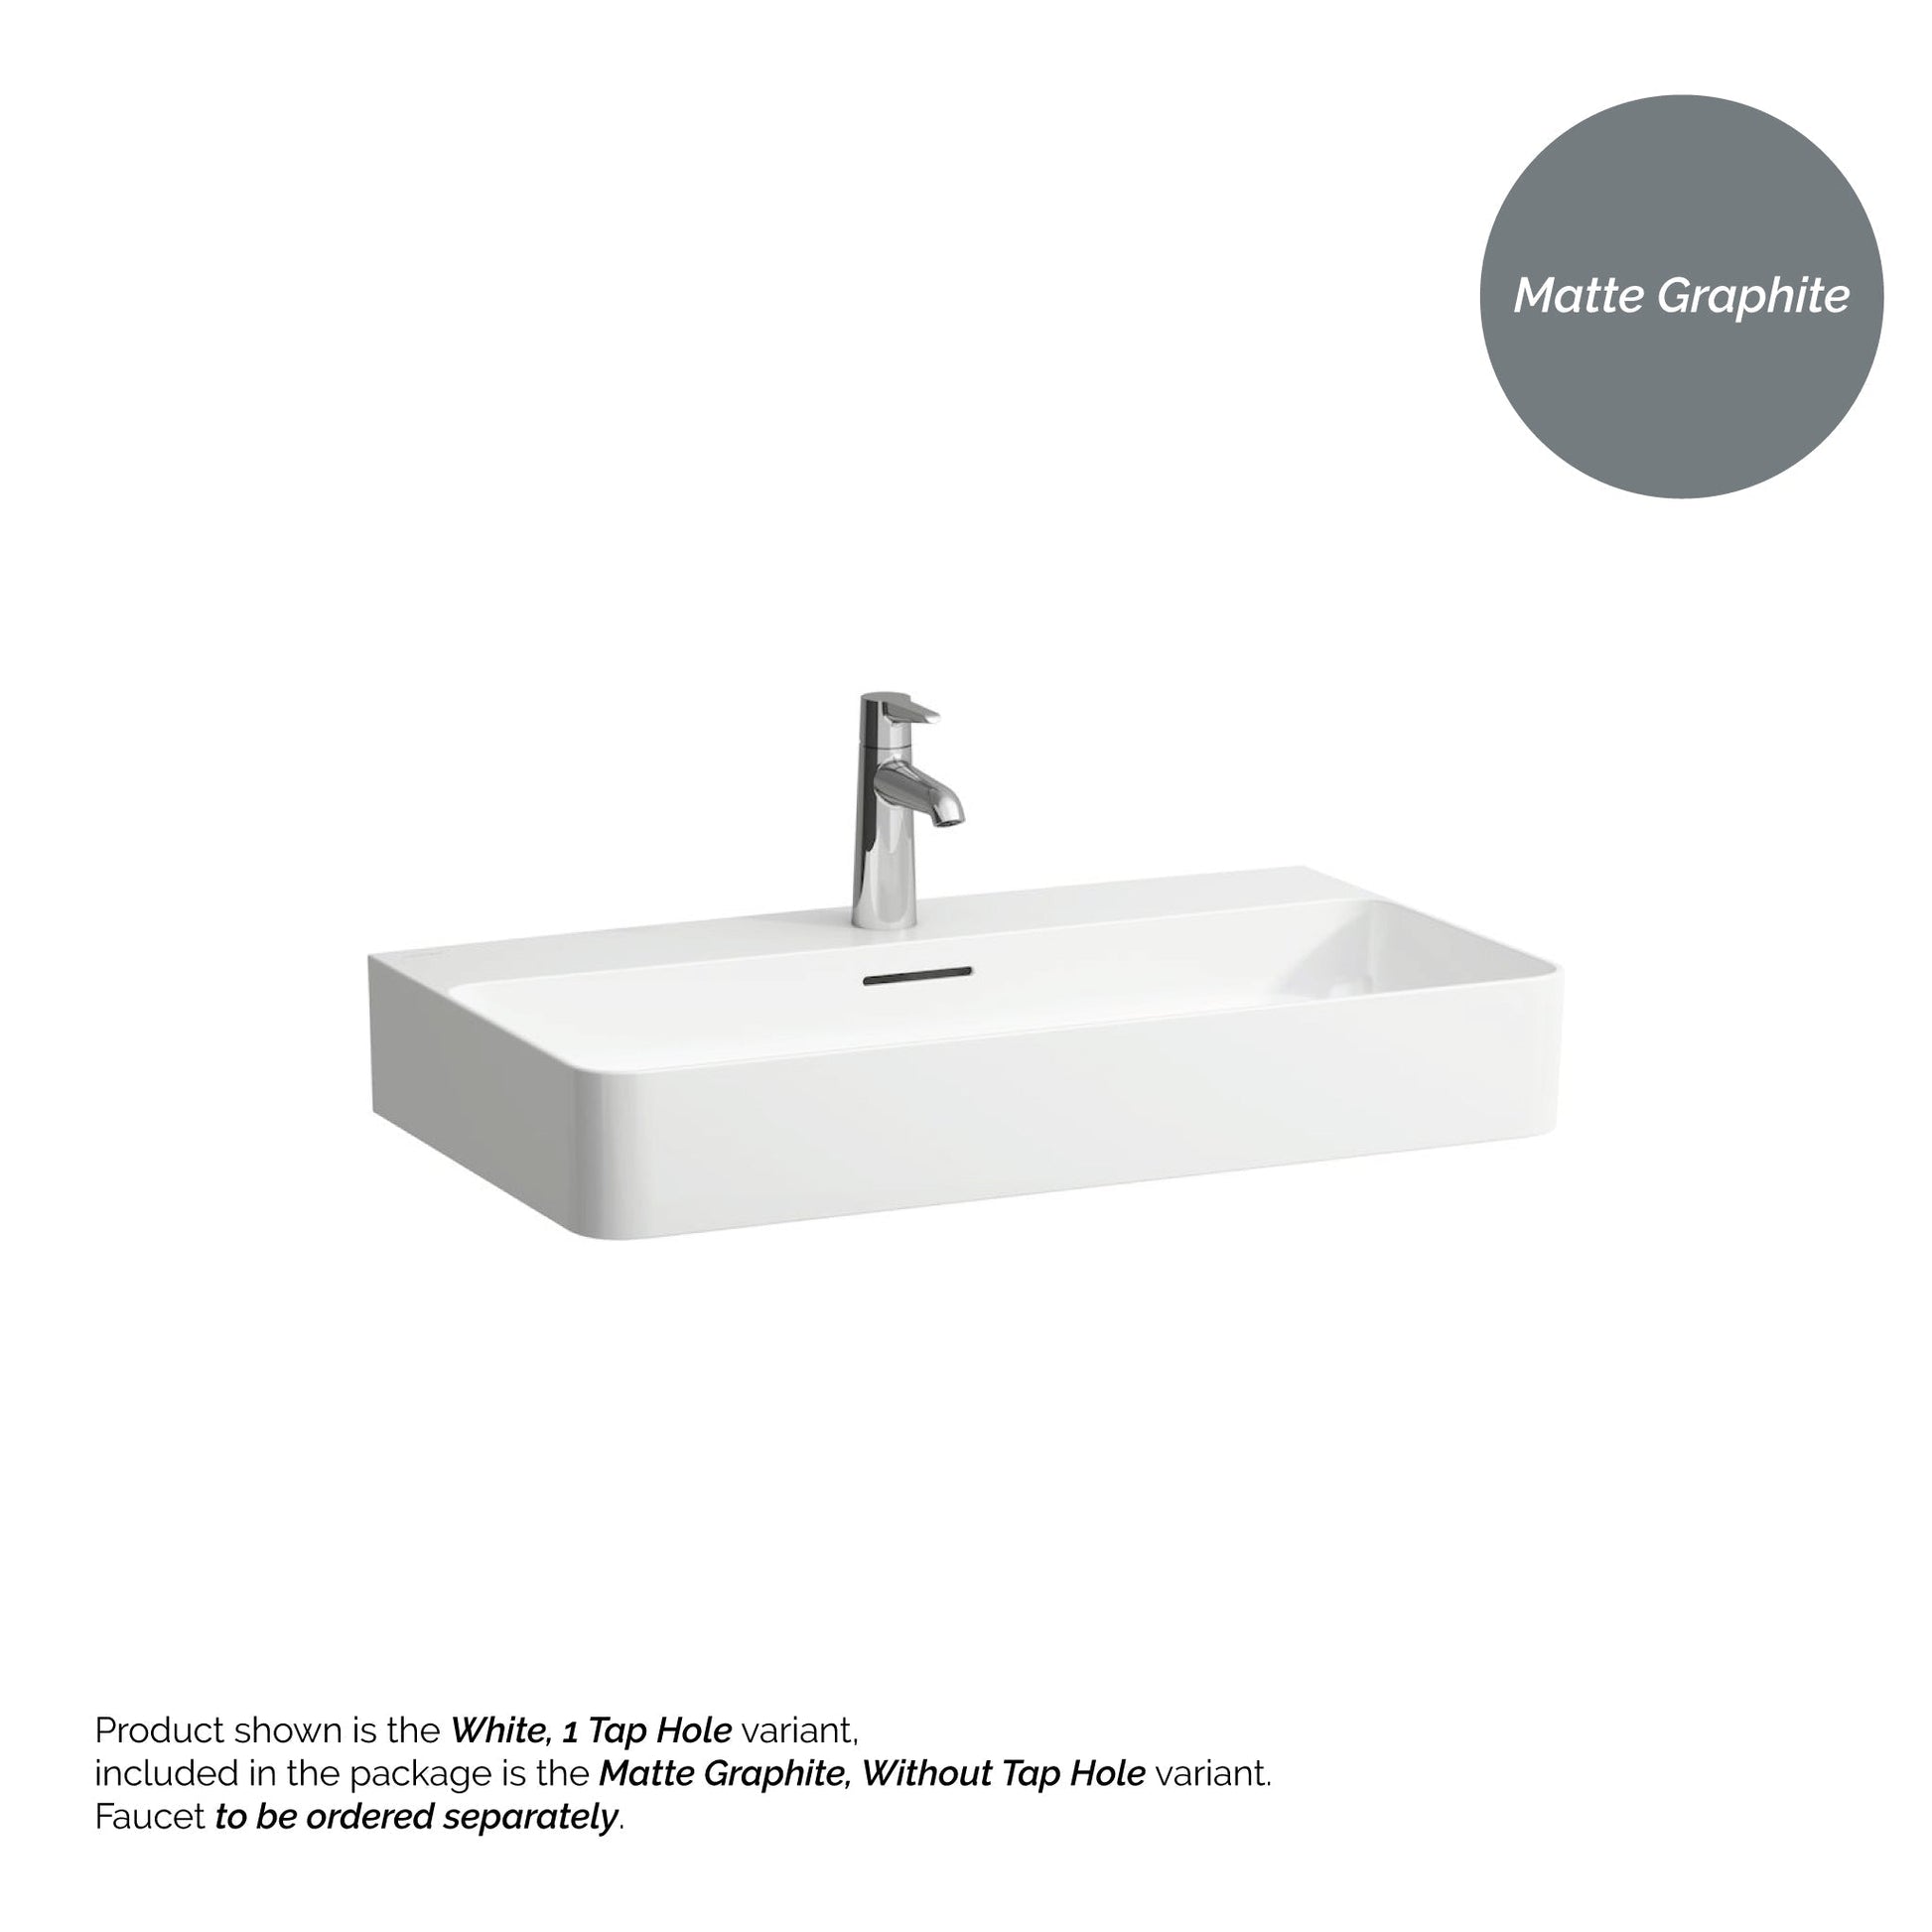 Laufen Val 30" x 17" Matte Graphite Ceramic Wall-Mounted Bathroom Sink Without Faucet Hole